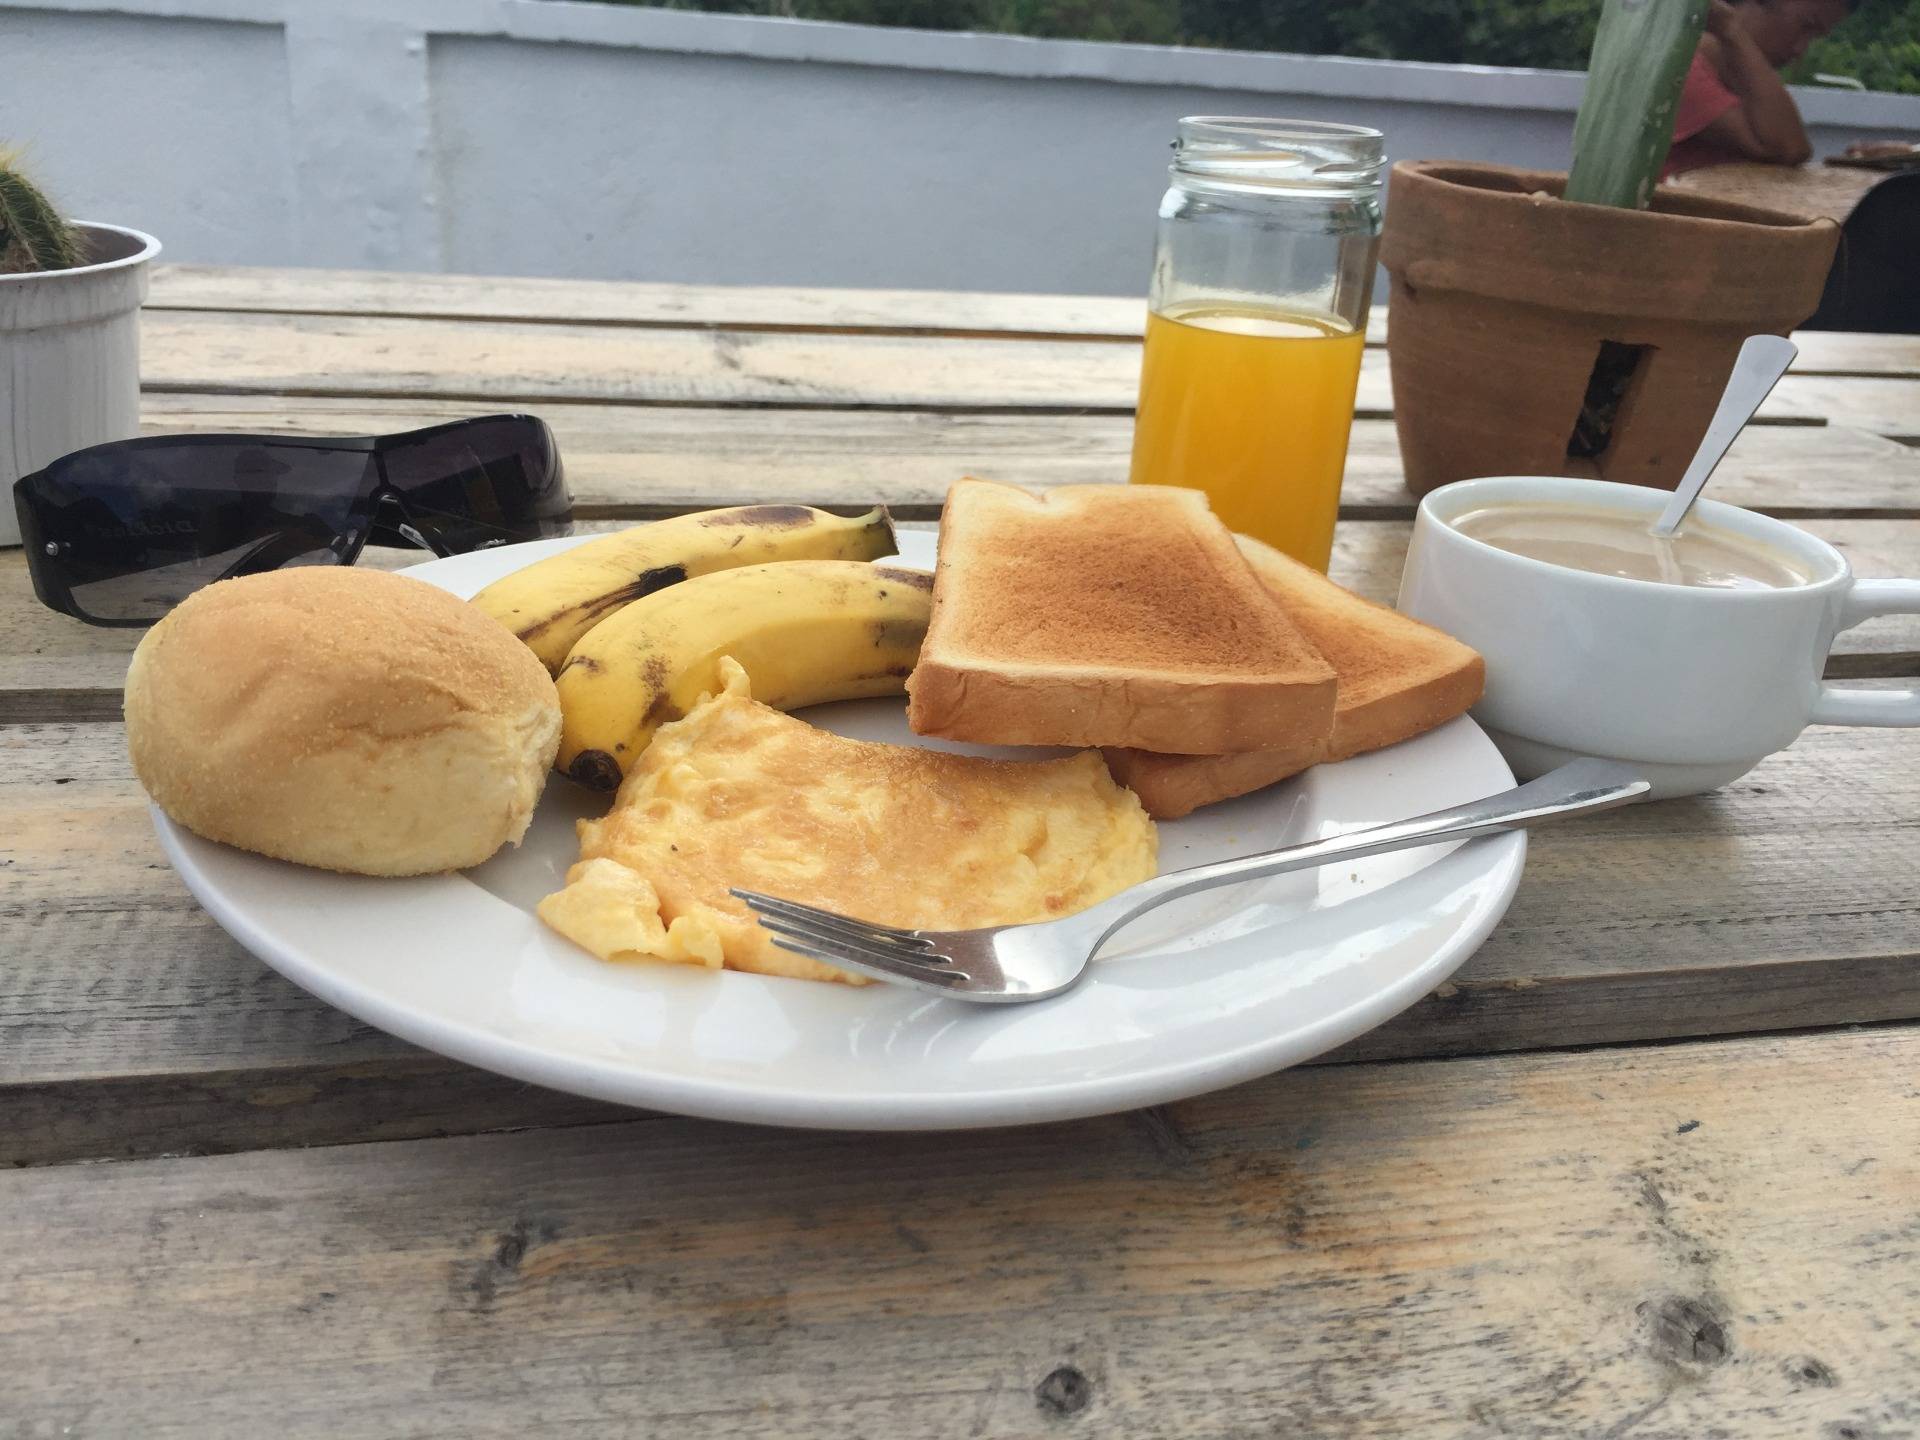 My breakfast at the hostel rooftop